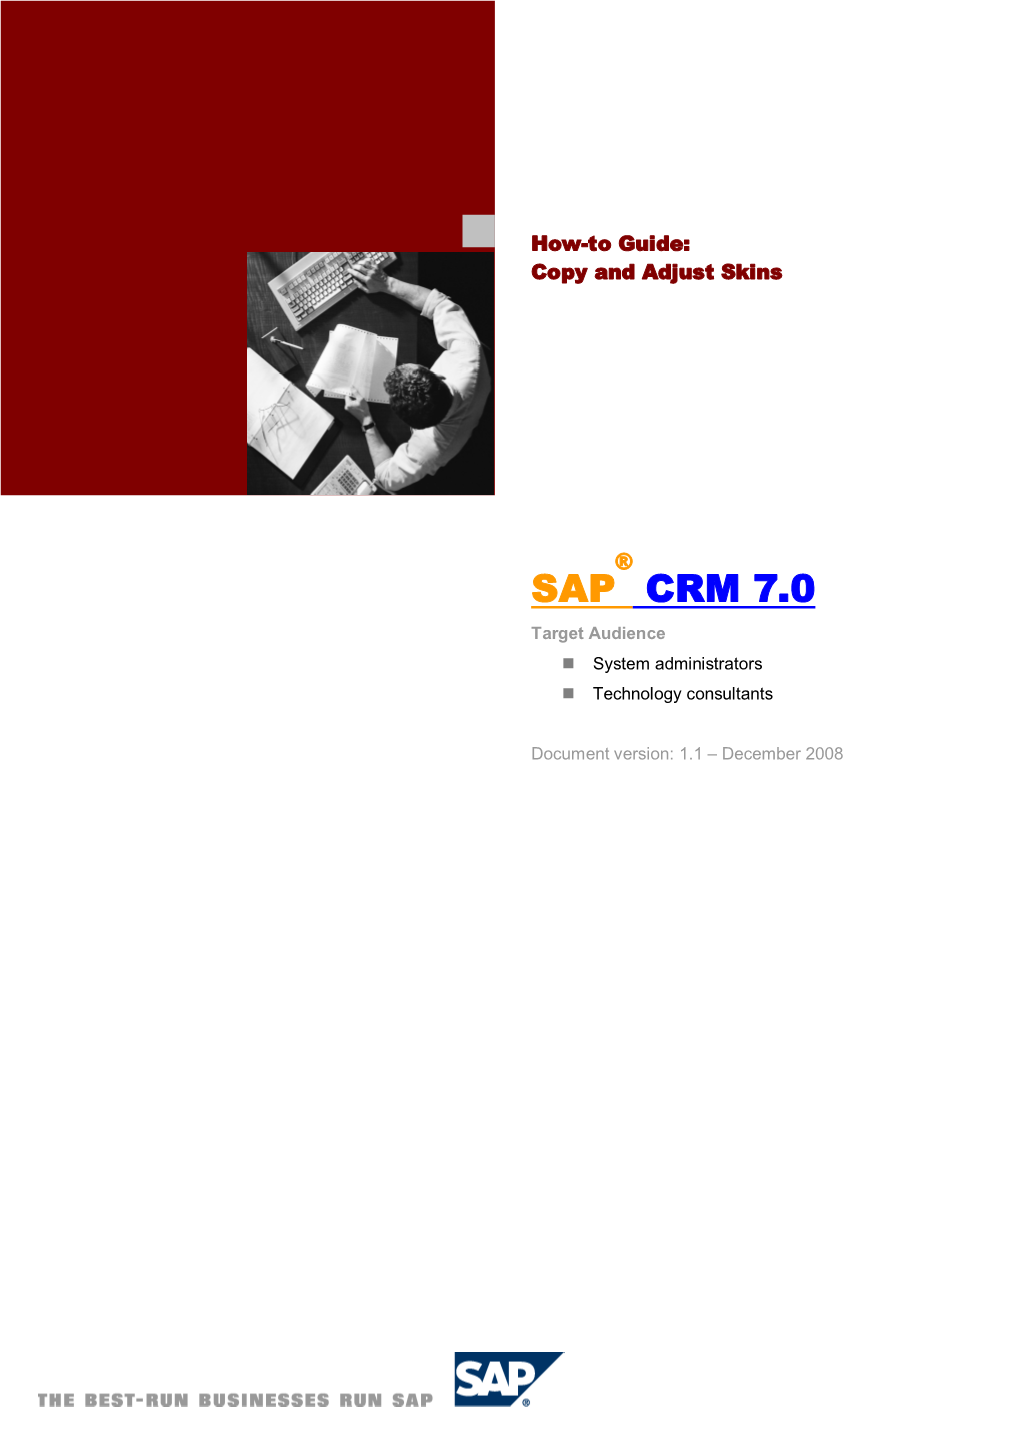 How-To Guide: Copy and Adjust Skins (SAP CRM 7.0).Pdf